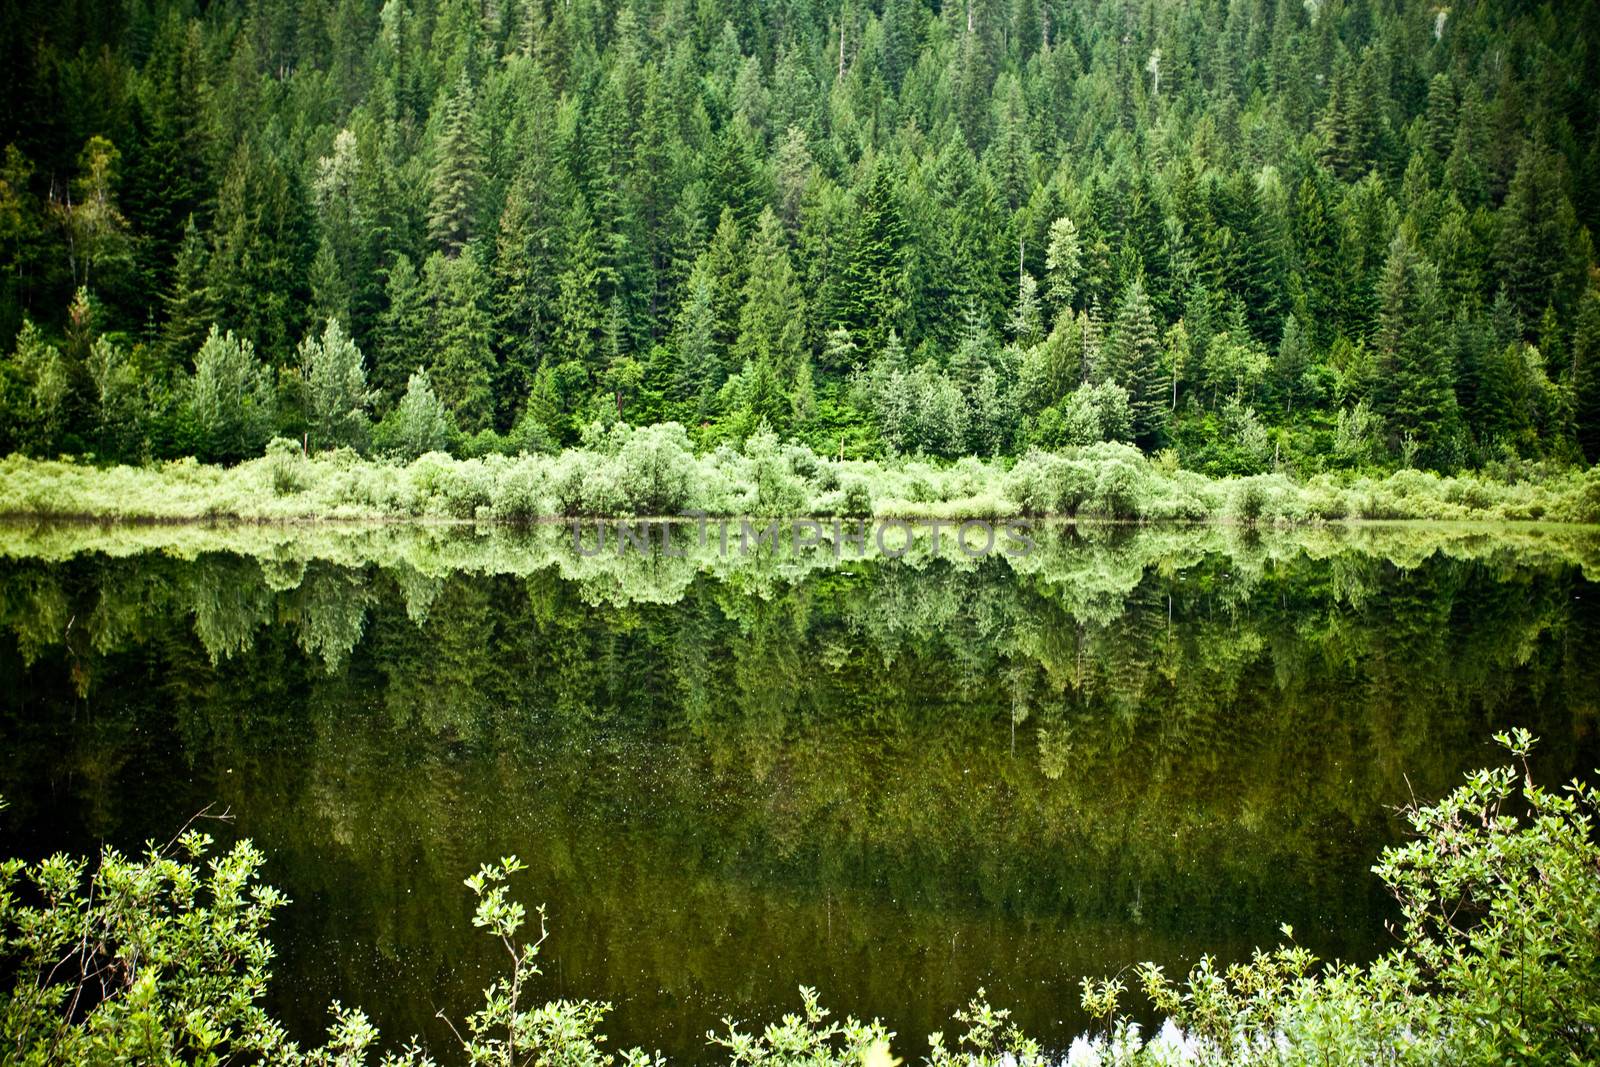 Peaceful green lake surrounded by vegetation, mirrored in the water